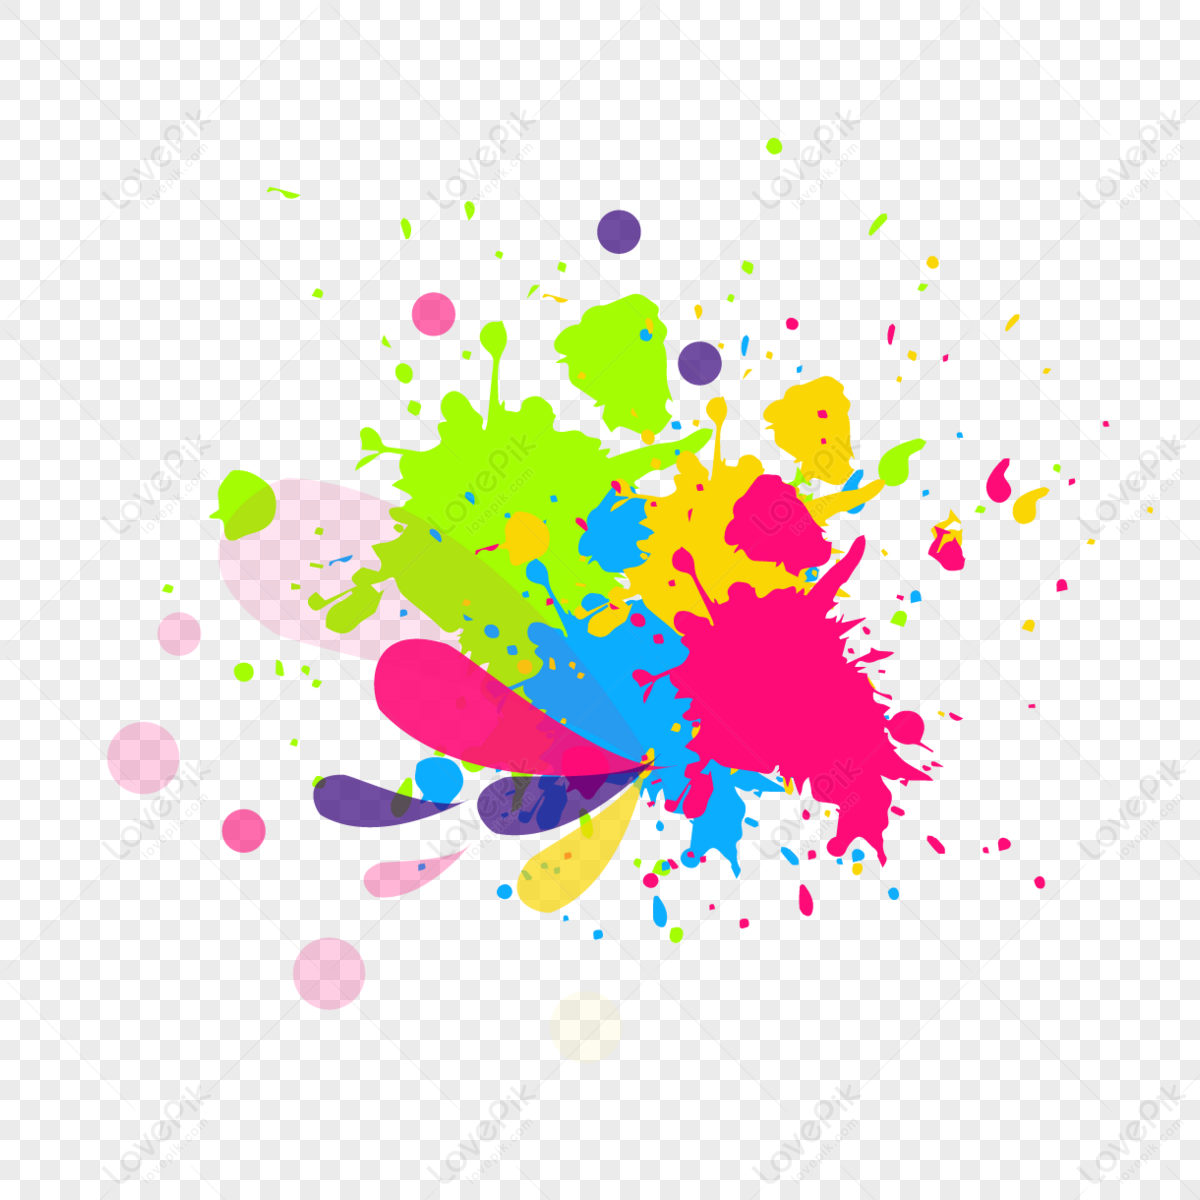 Paint Splash,splatter,poster,art Free PNG And Clipart Image For Free ...